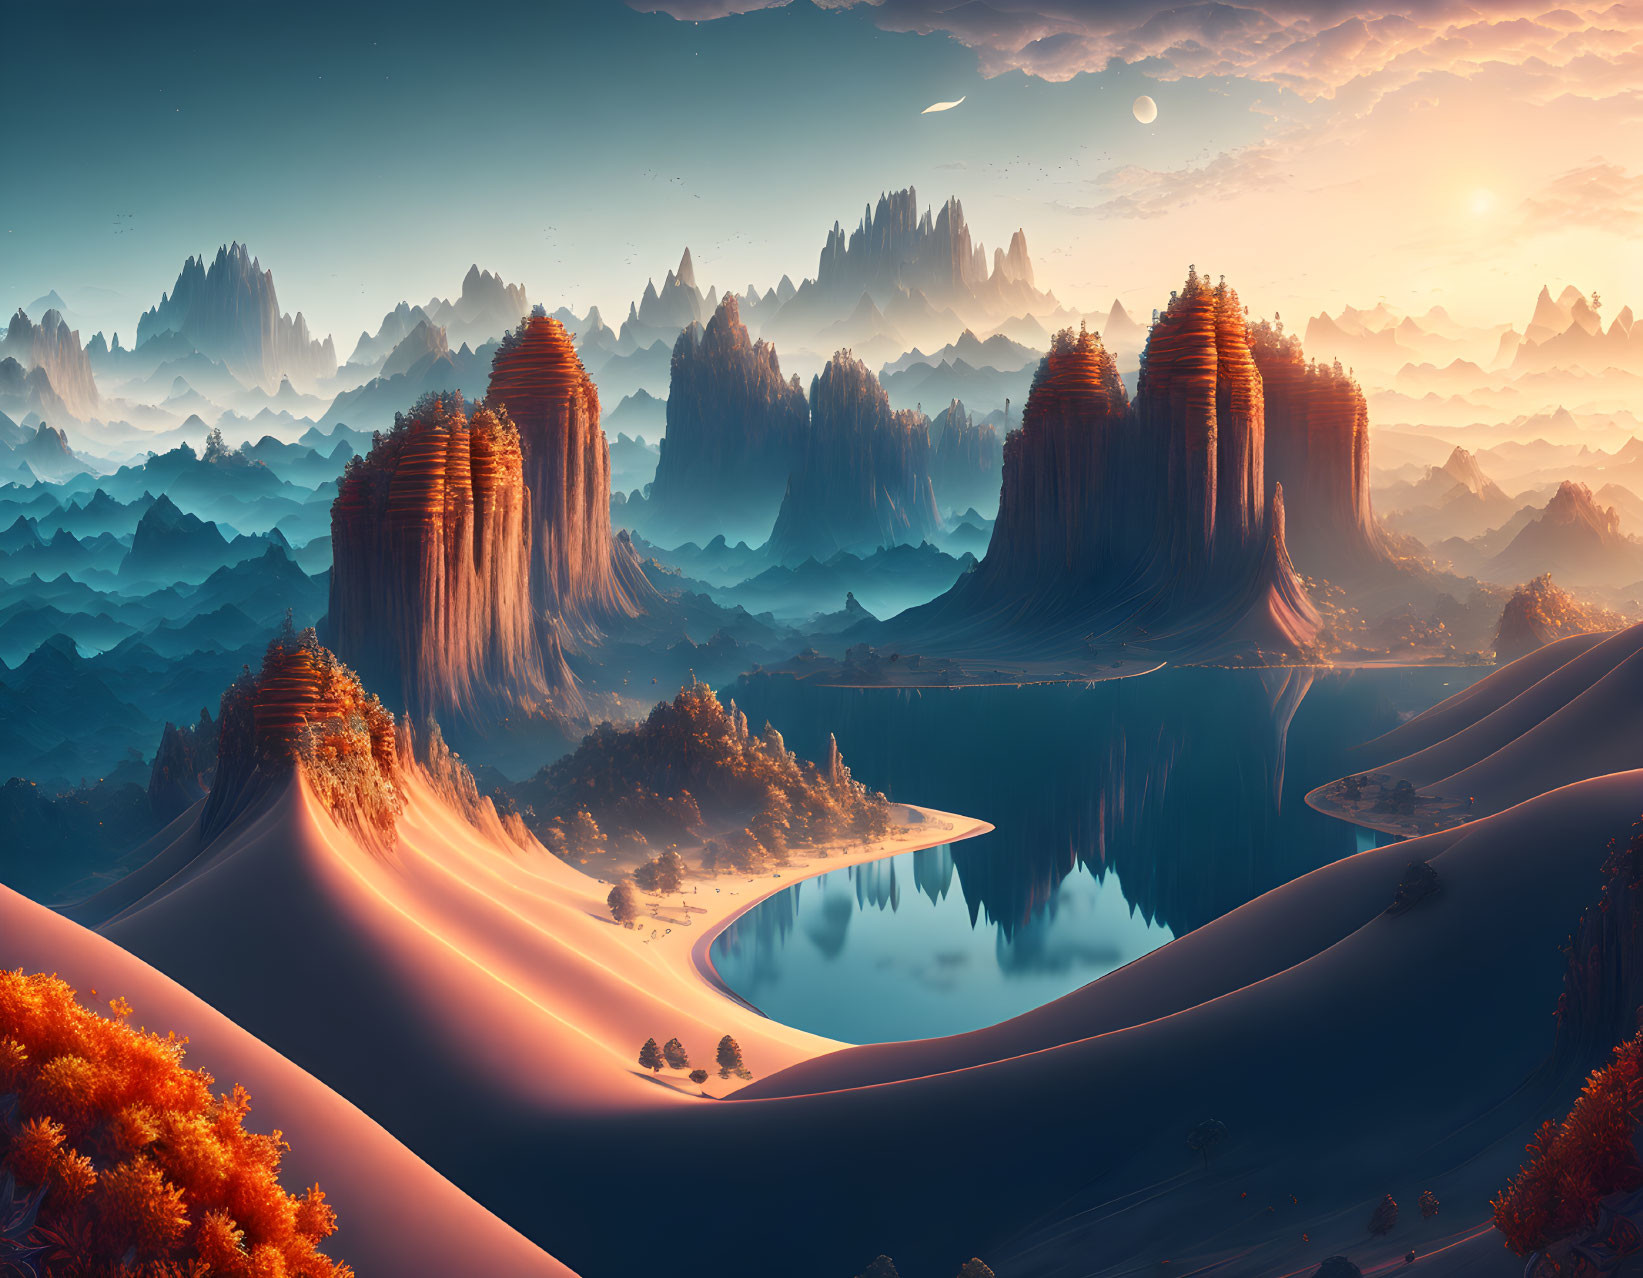 Surreal landscape with towering rock formations and autumn trees at sunset